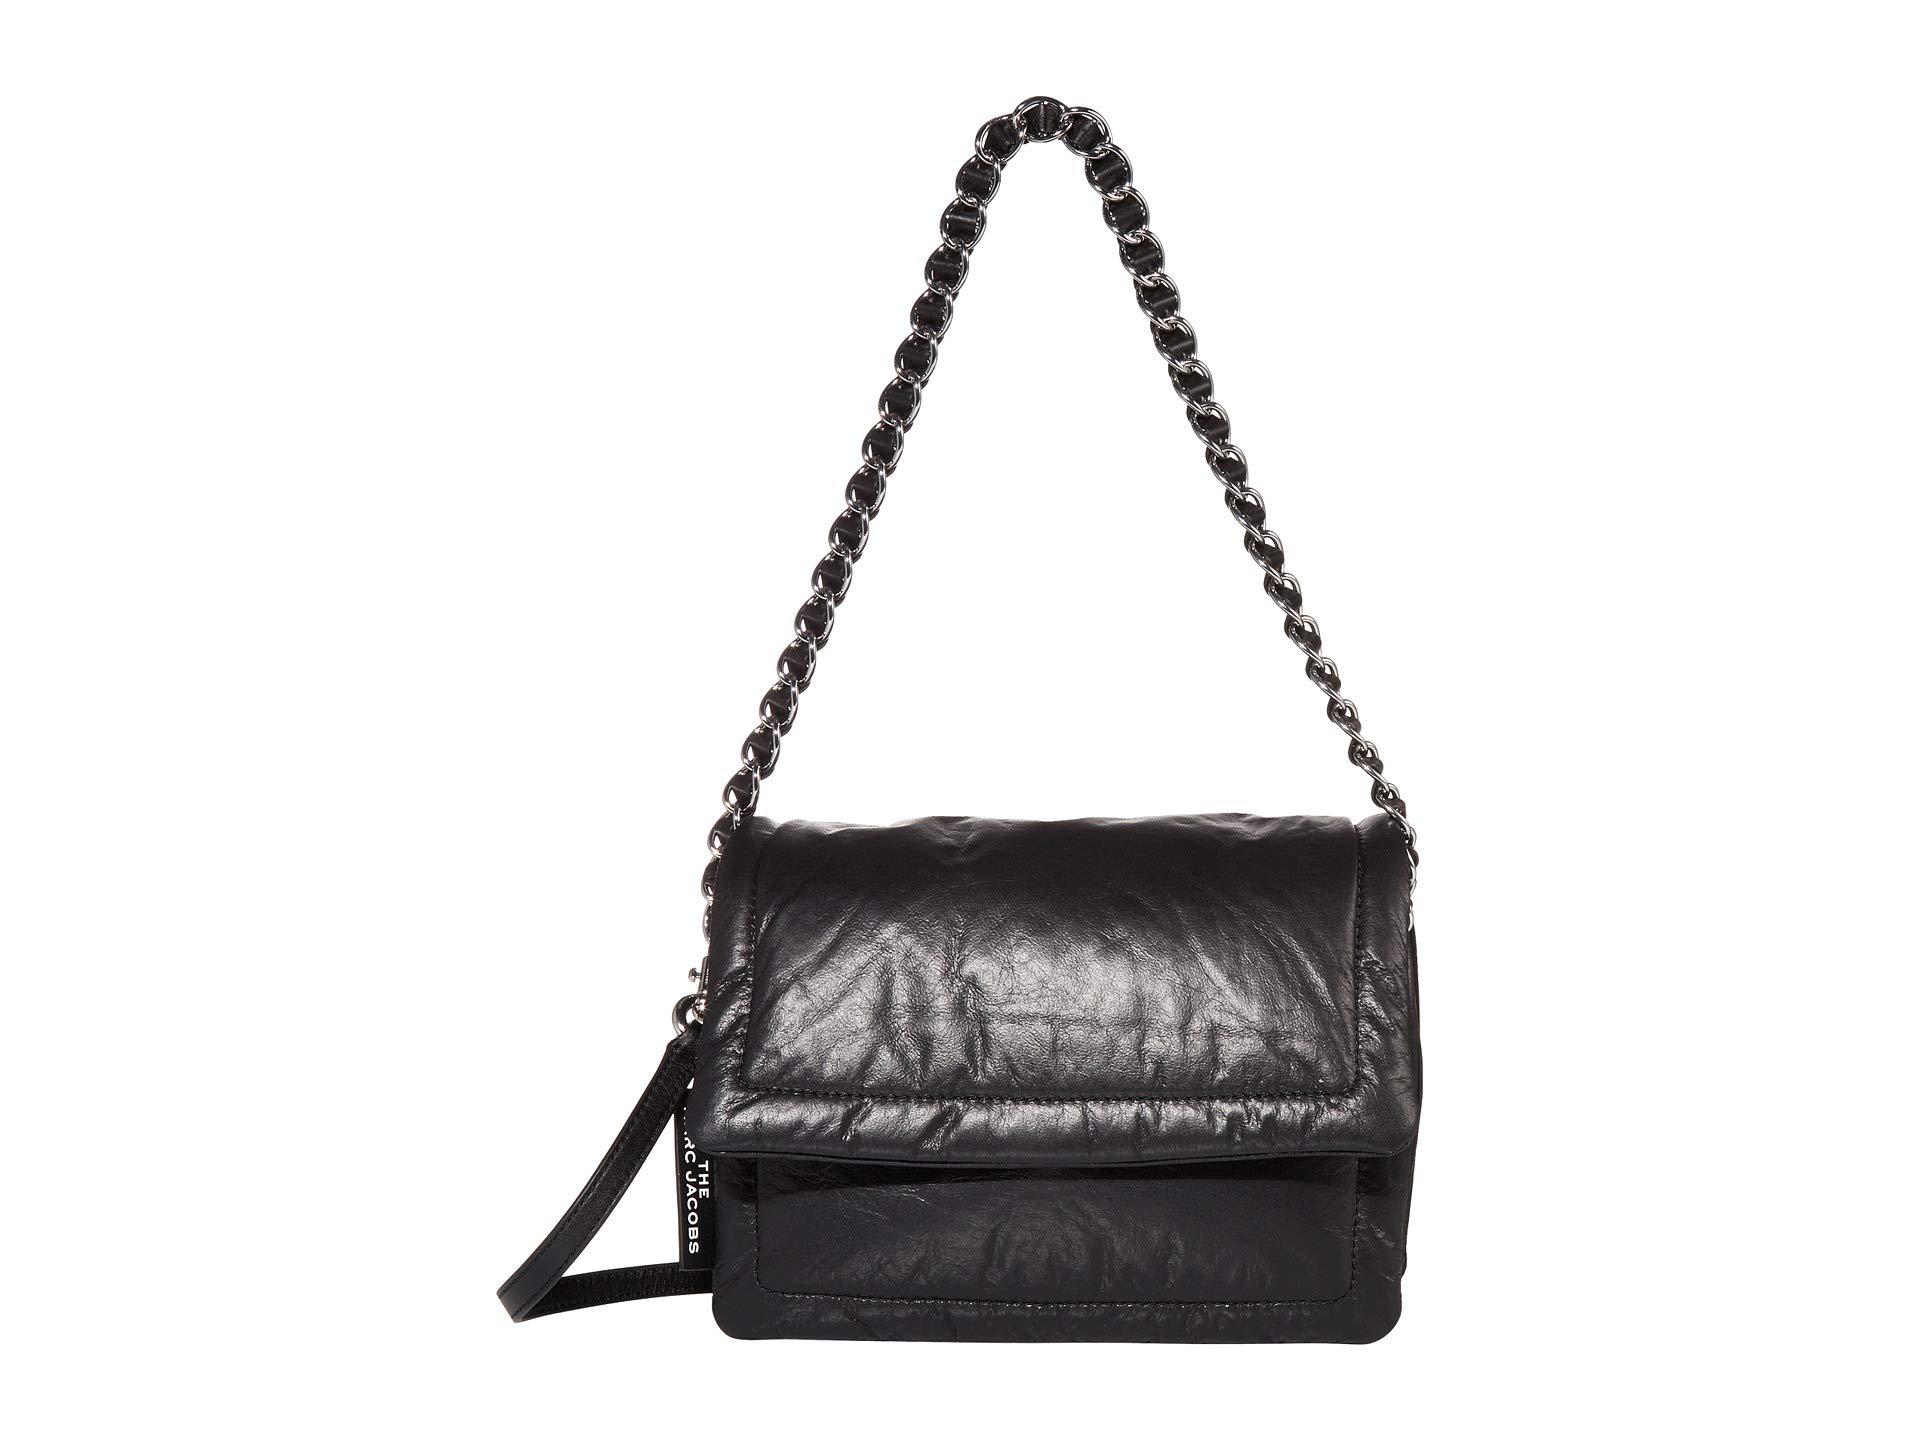 Buy Marc Jacobs Marc Jacobs Small Quilted Pillow Bag Black H949L01RE22 2023  Online